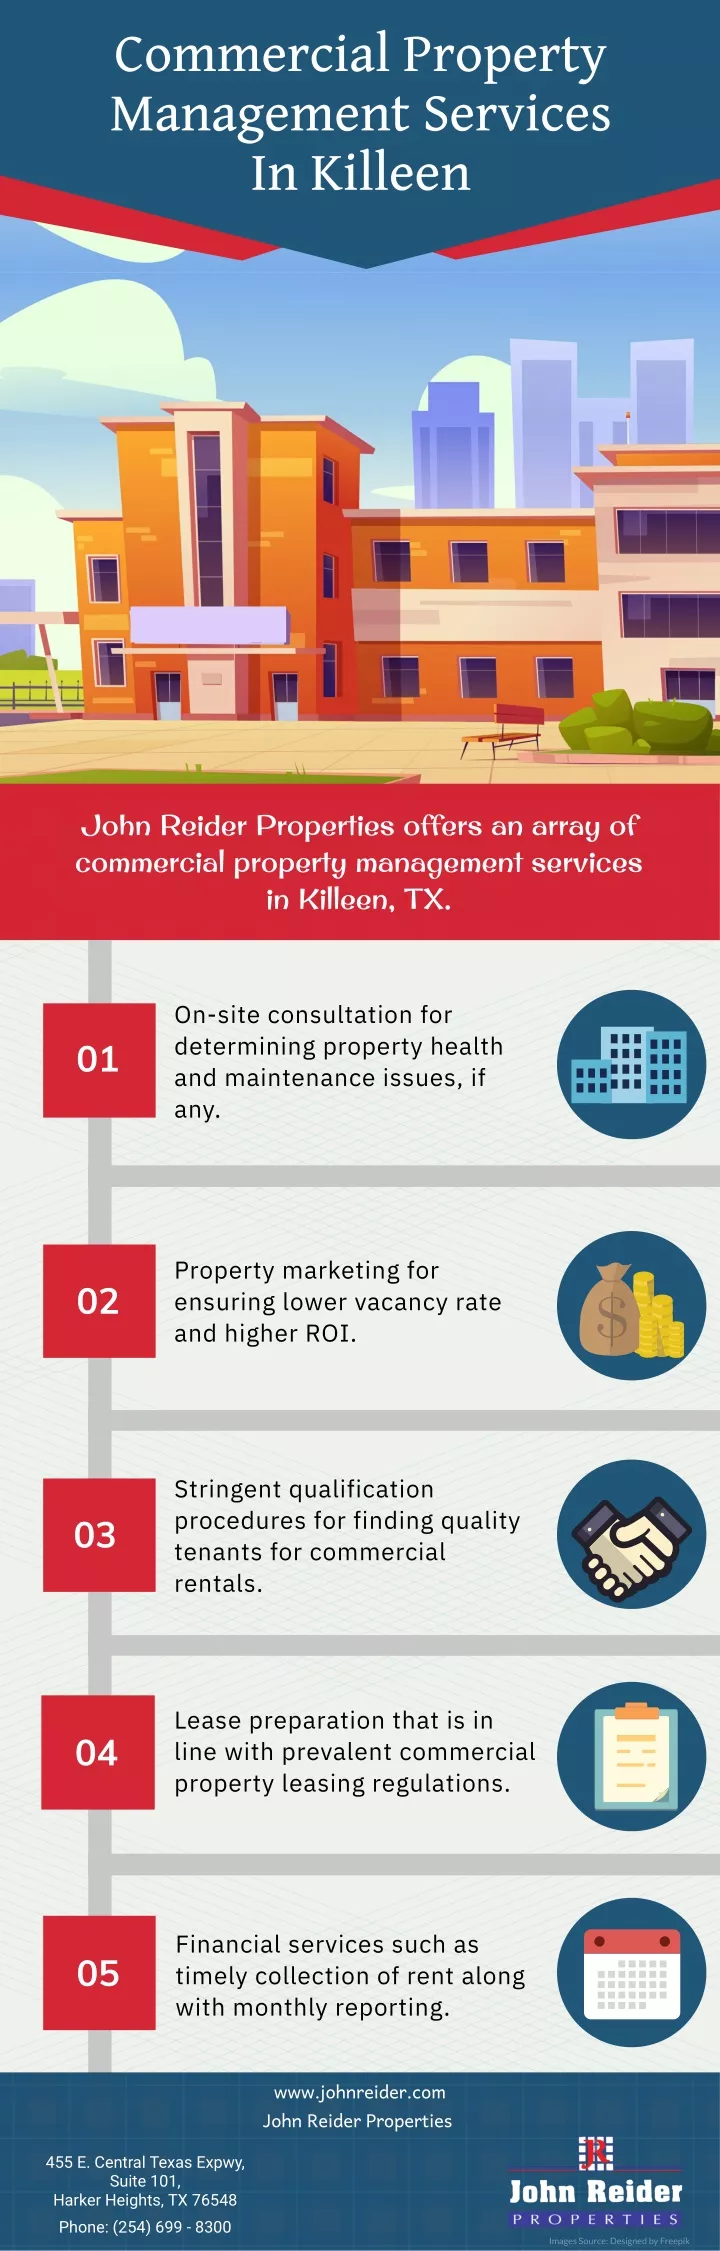 commercial property management services in killeen